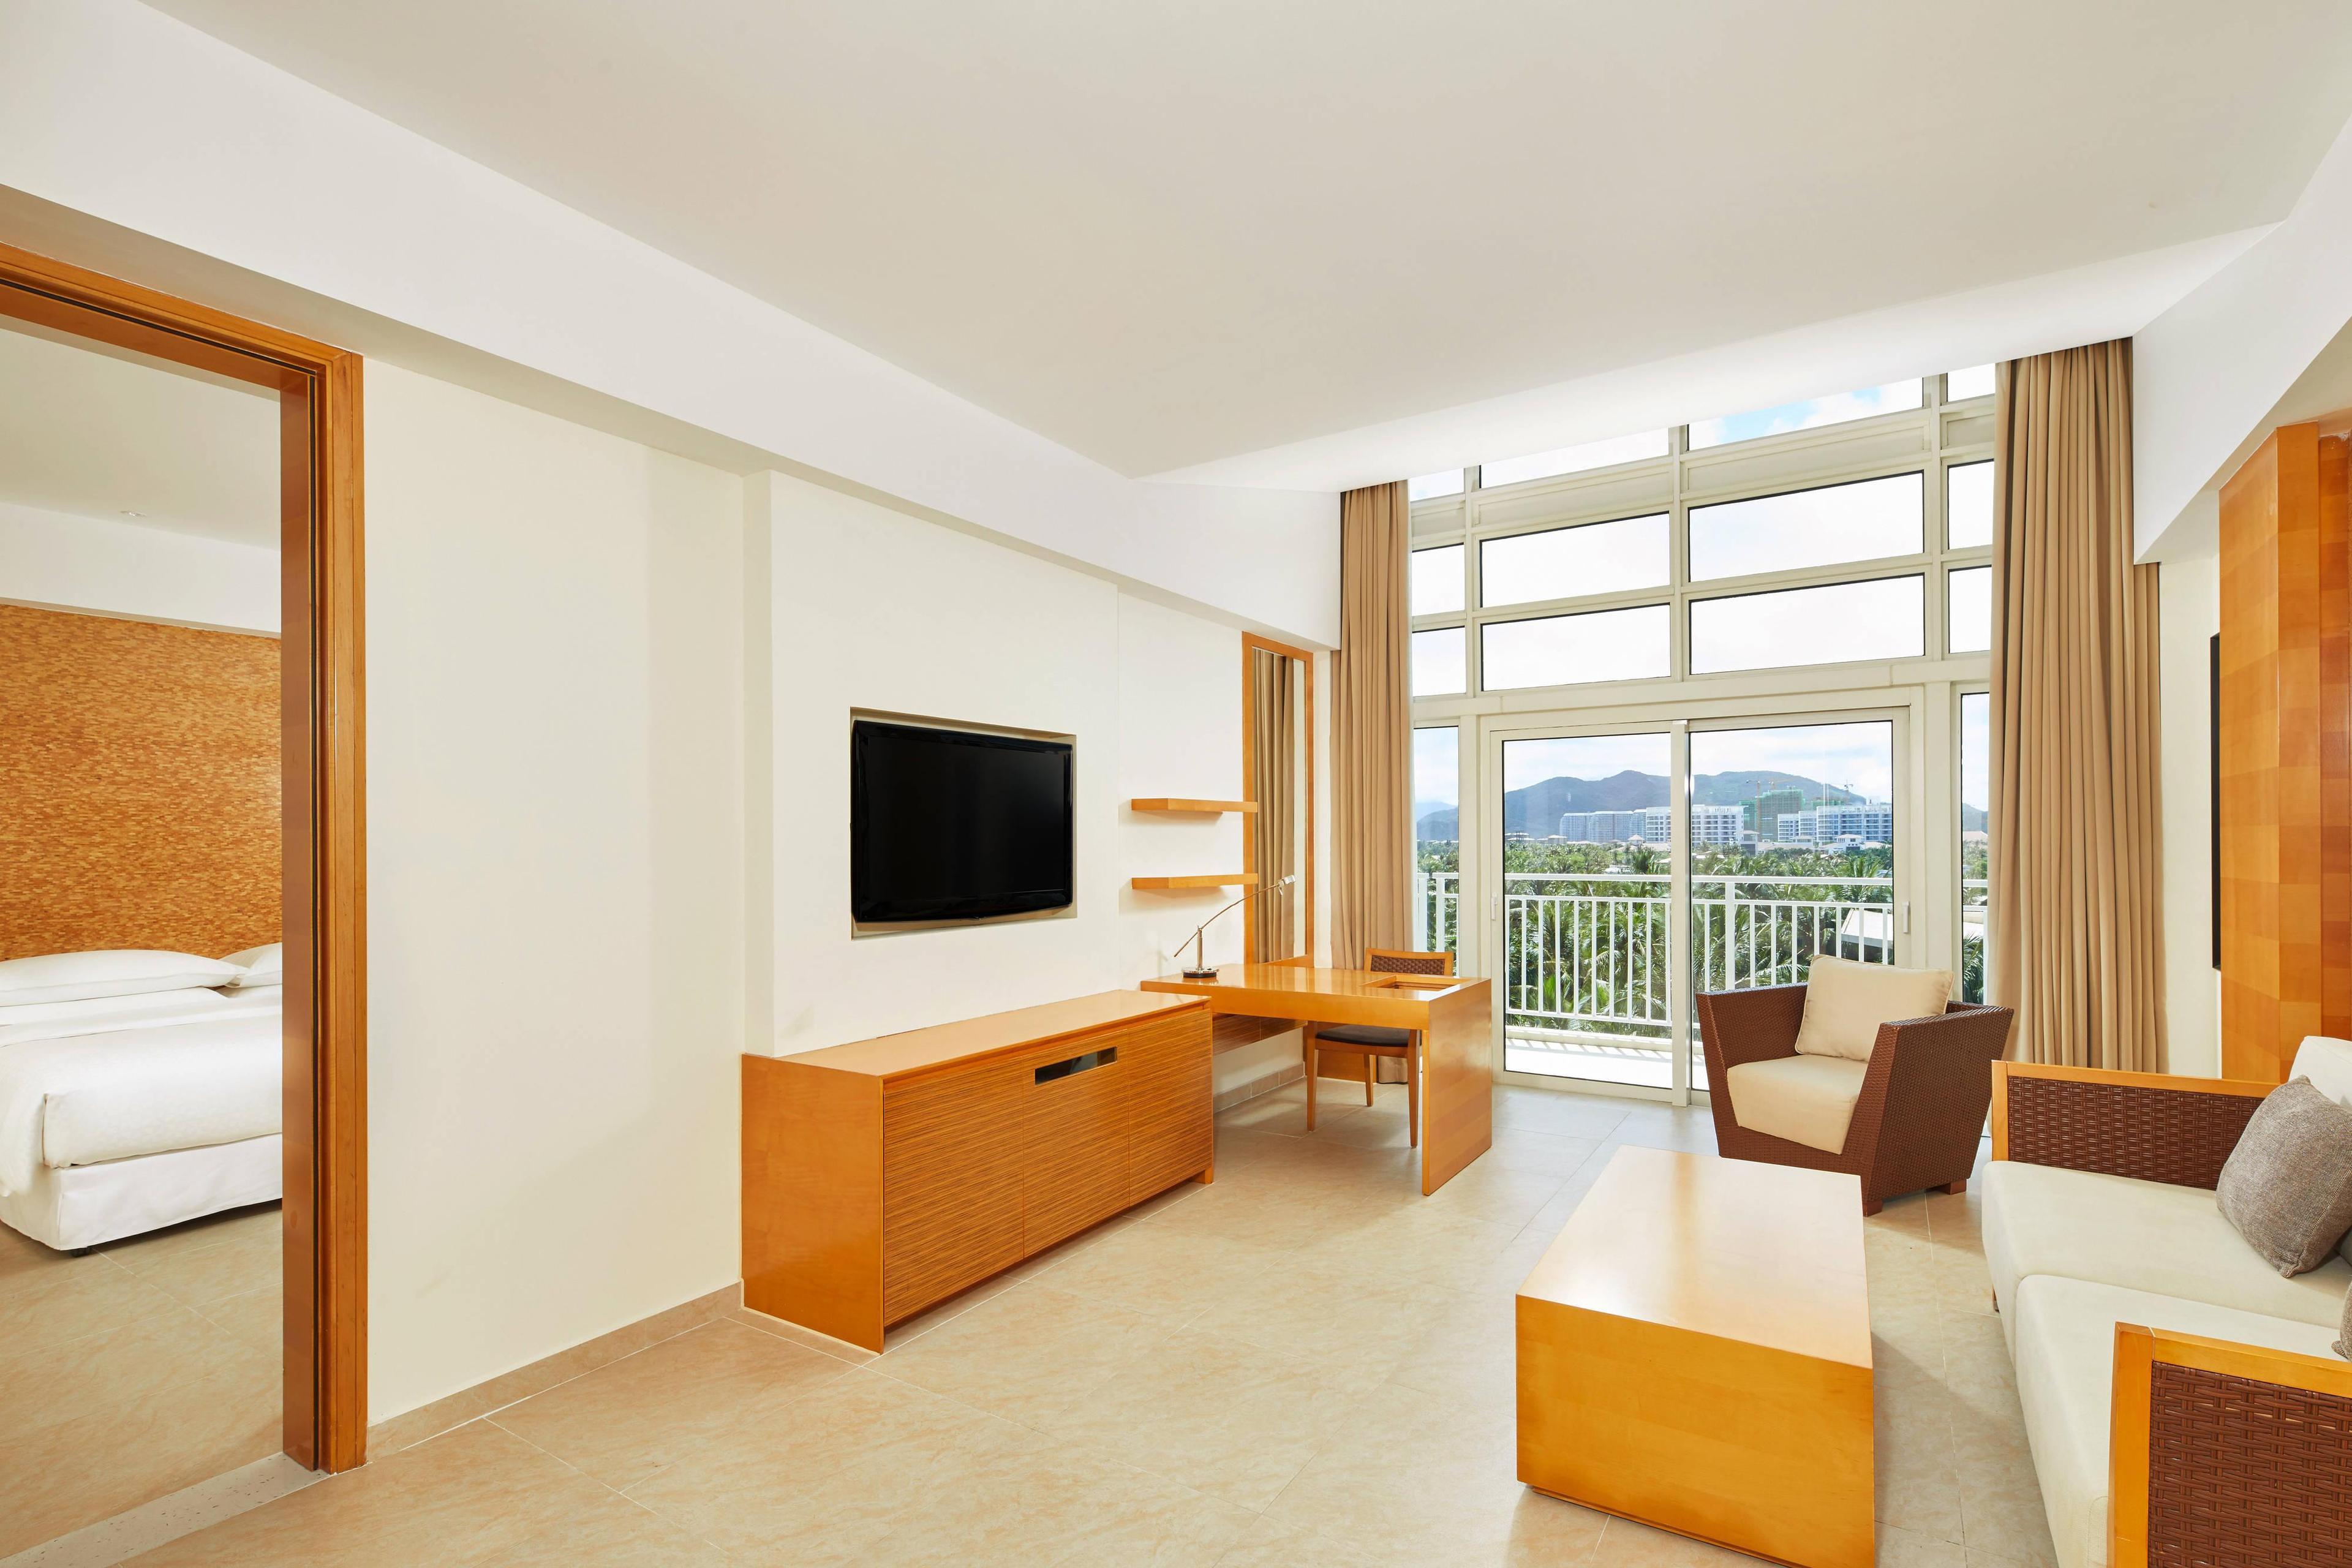 84 sqm suite, one living room and one bedroom, overlooking the South China Sea, located on floors 5 and 6.